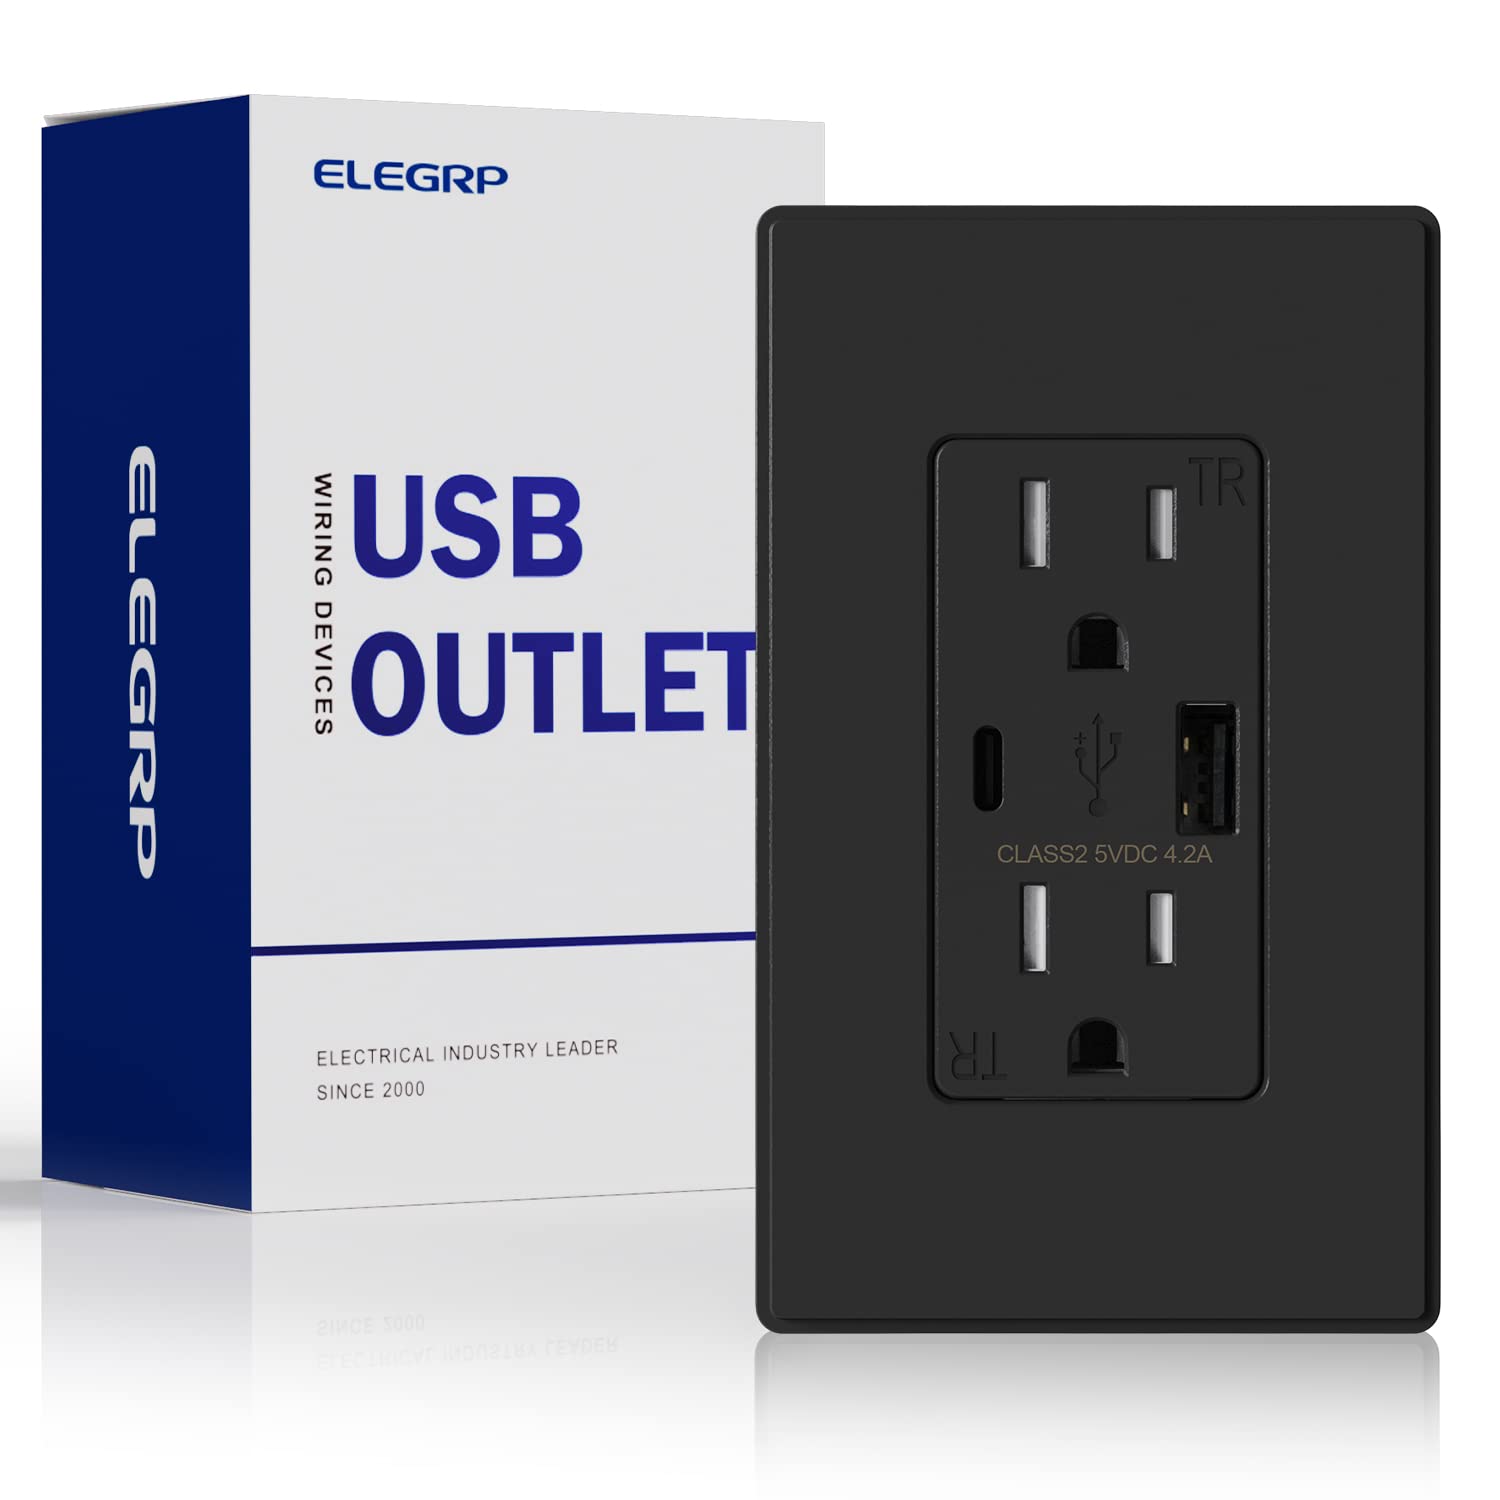 ELEGRP USB Outlet, Type C USB Wall Charger Outlet,Tamper Resistant Receptacle